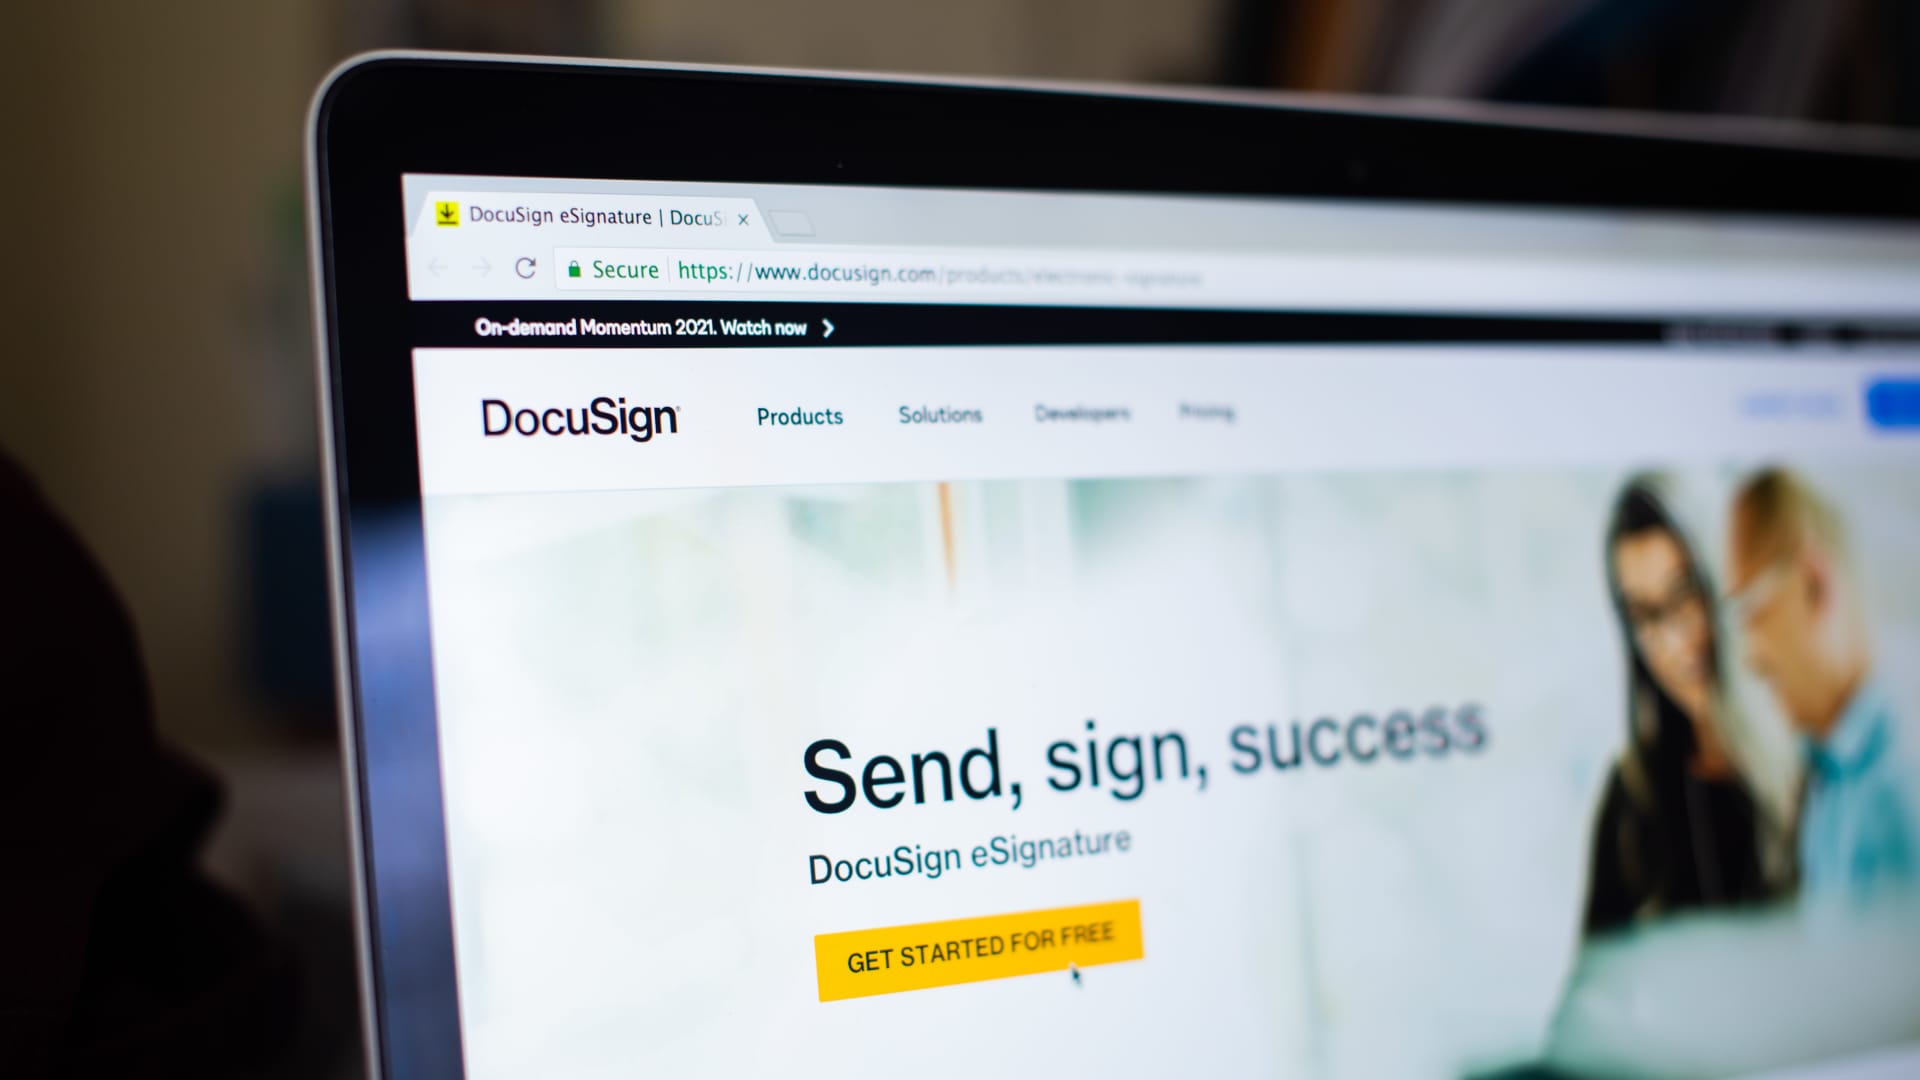 DocuSign gets 3 downgrades as analysts grow worried about e-signature company’s business